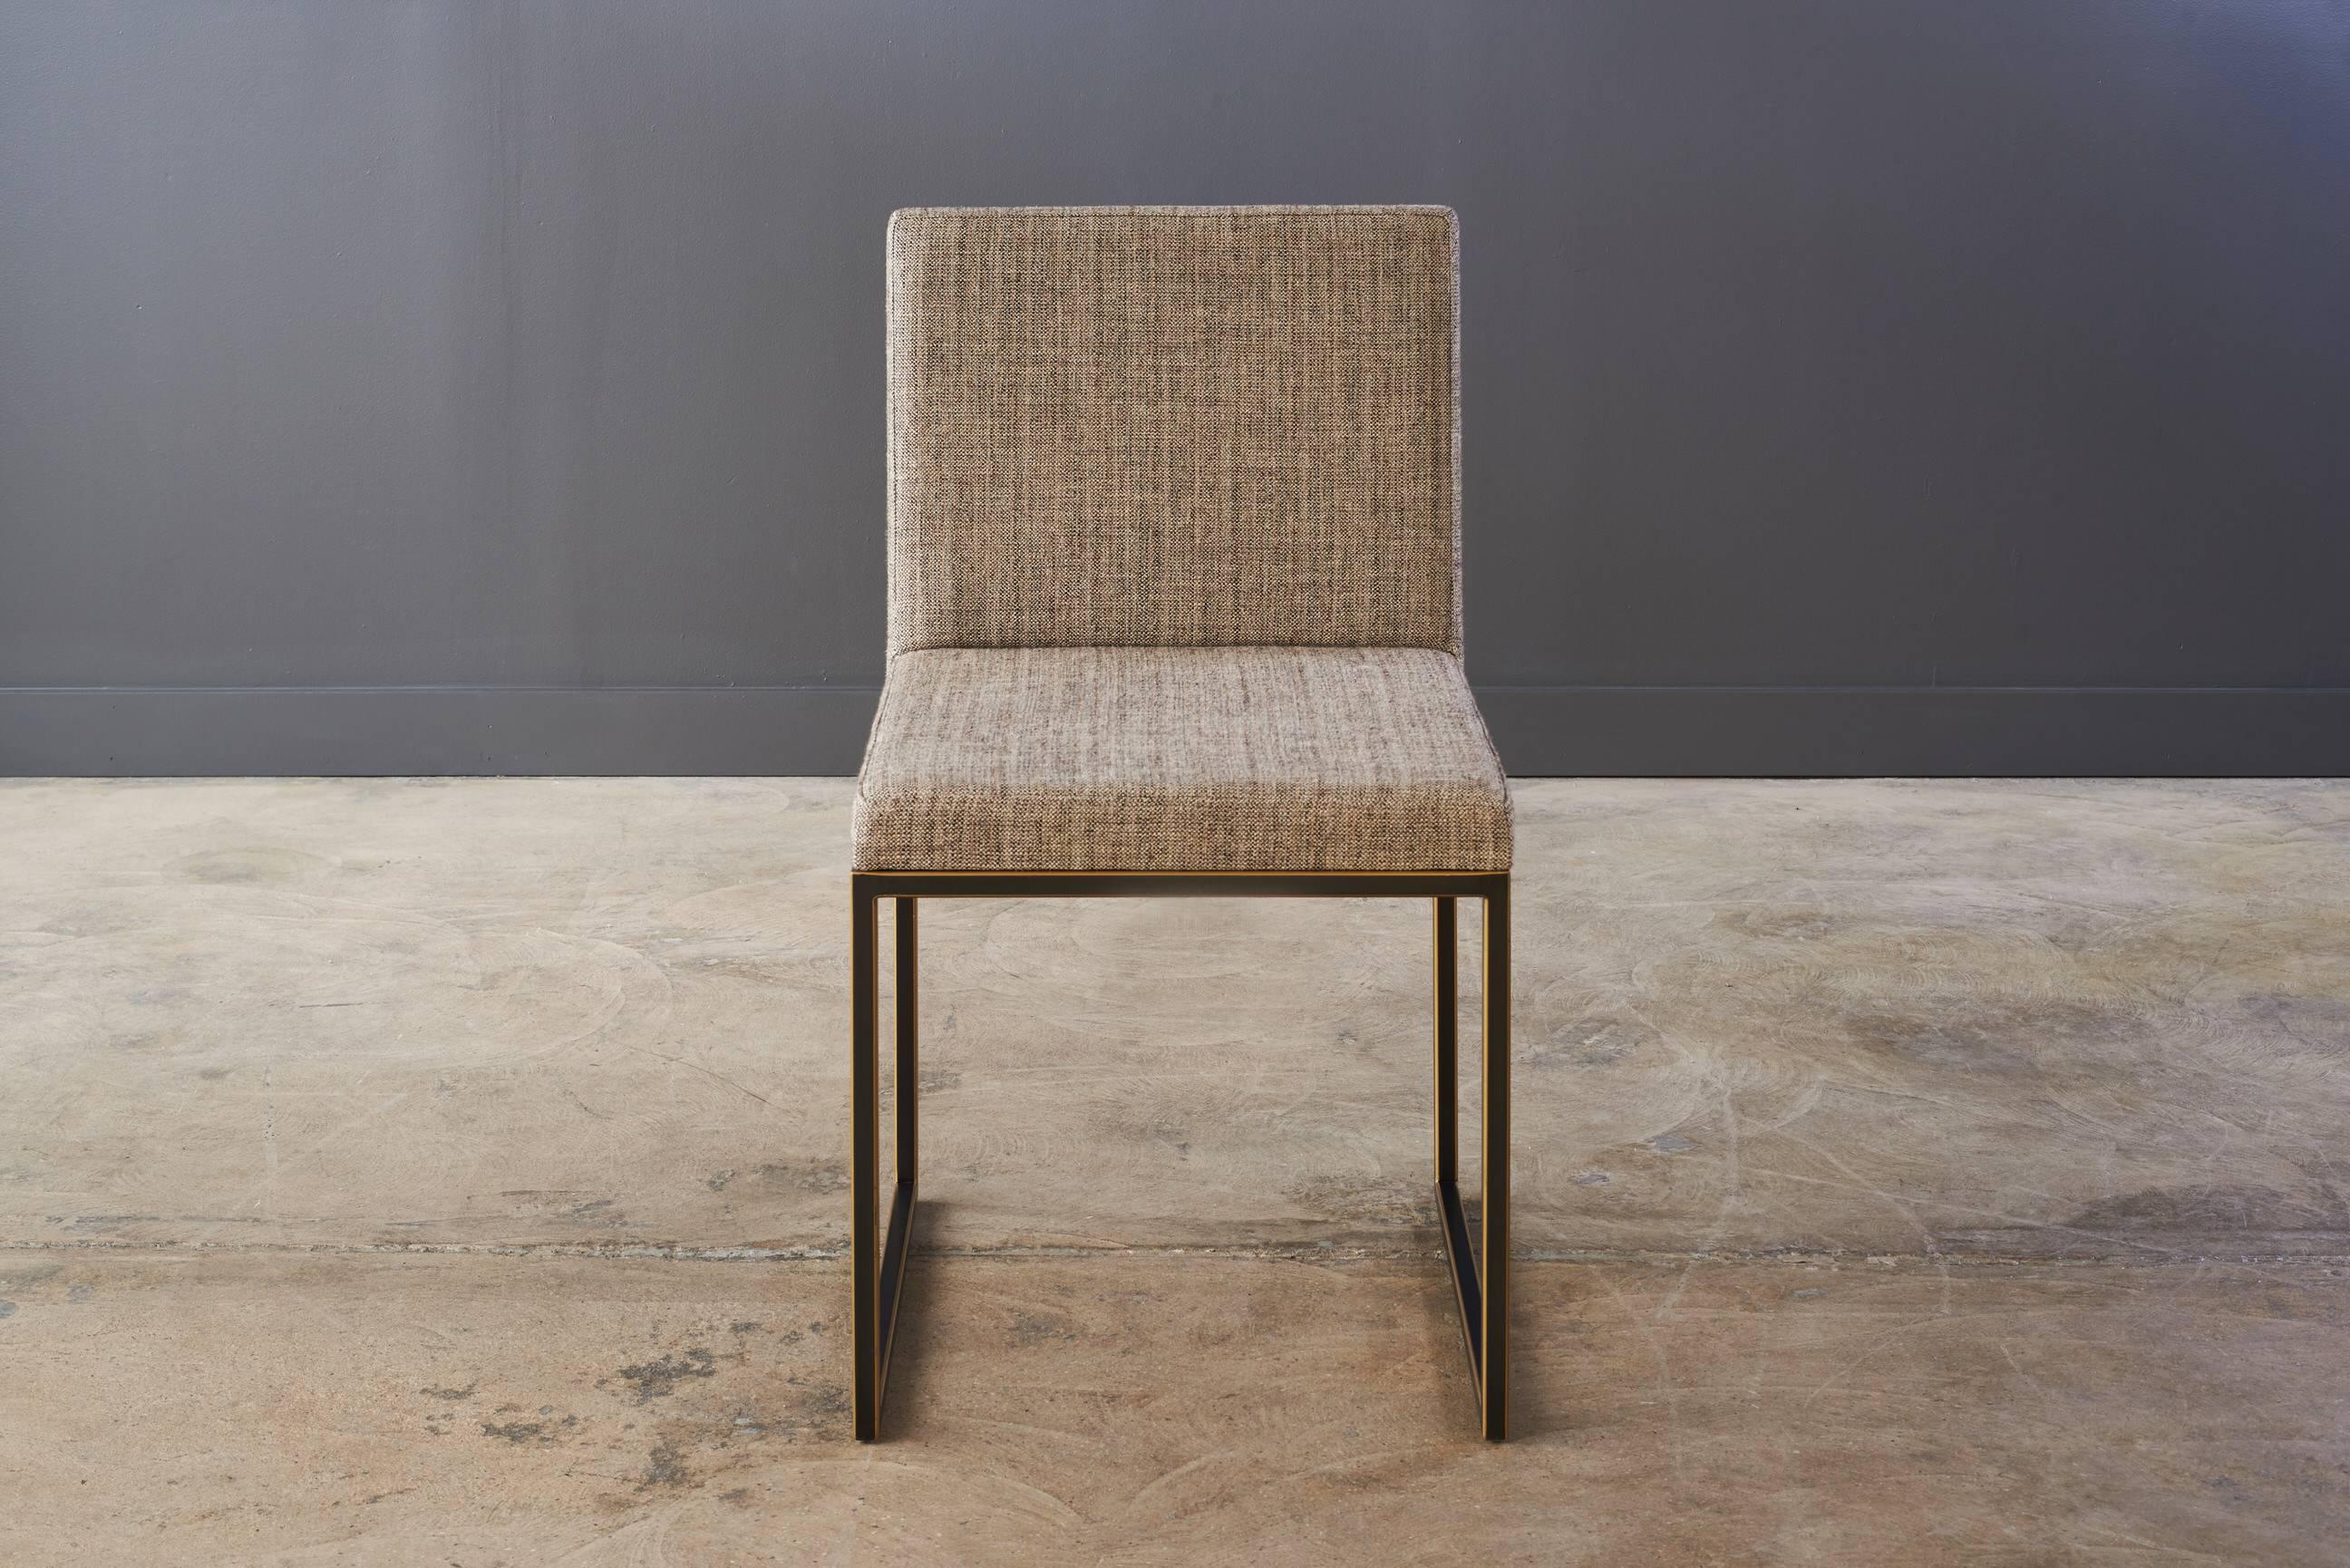 Shown in Oiled Bronze Base, Maharam Soft Tweed Sepia 
Measures: 18in x 20.625in x 32in H.

Each Desiron piece is handcrafted in the U.S.A., fully customizable and available in a variety of finishes.